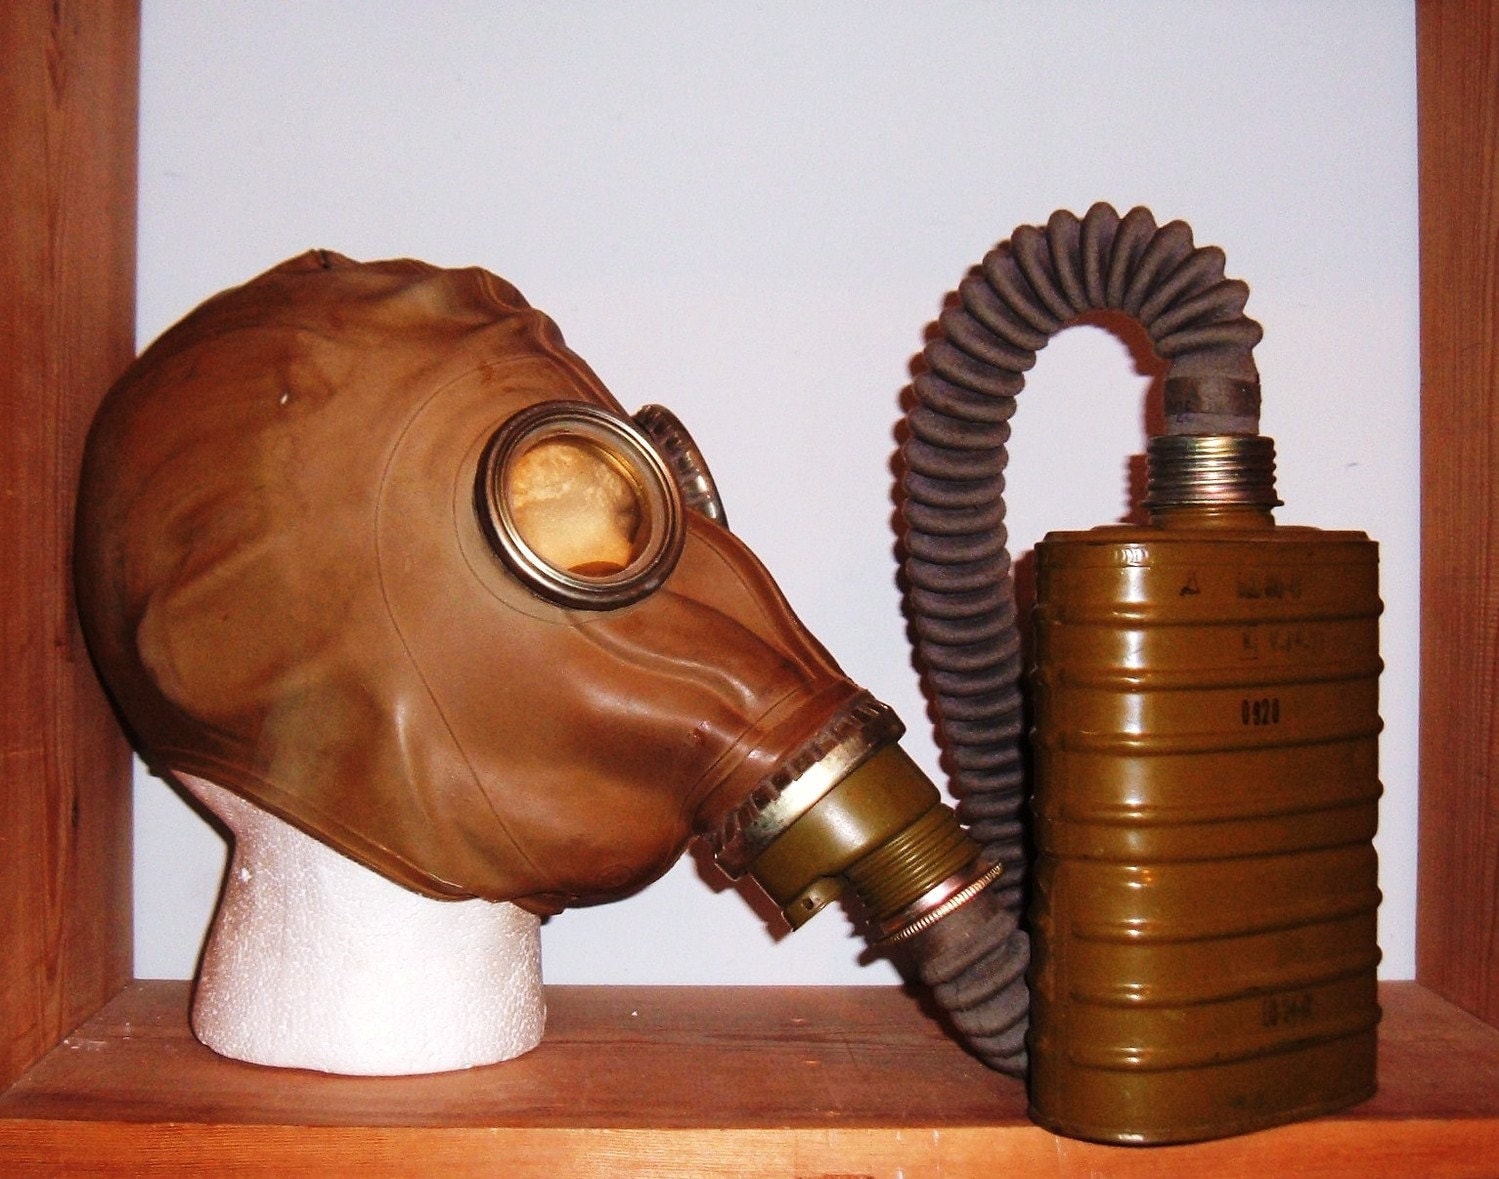 wwii gas mask